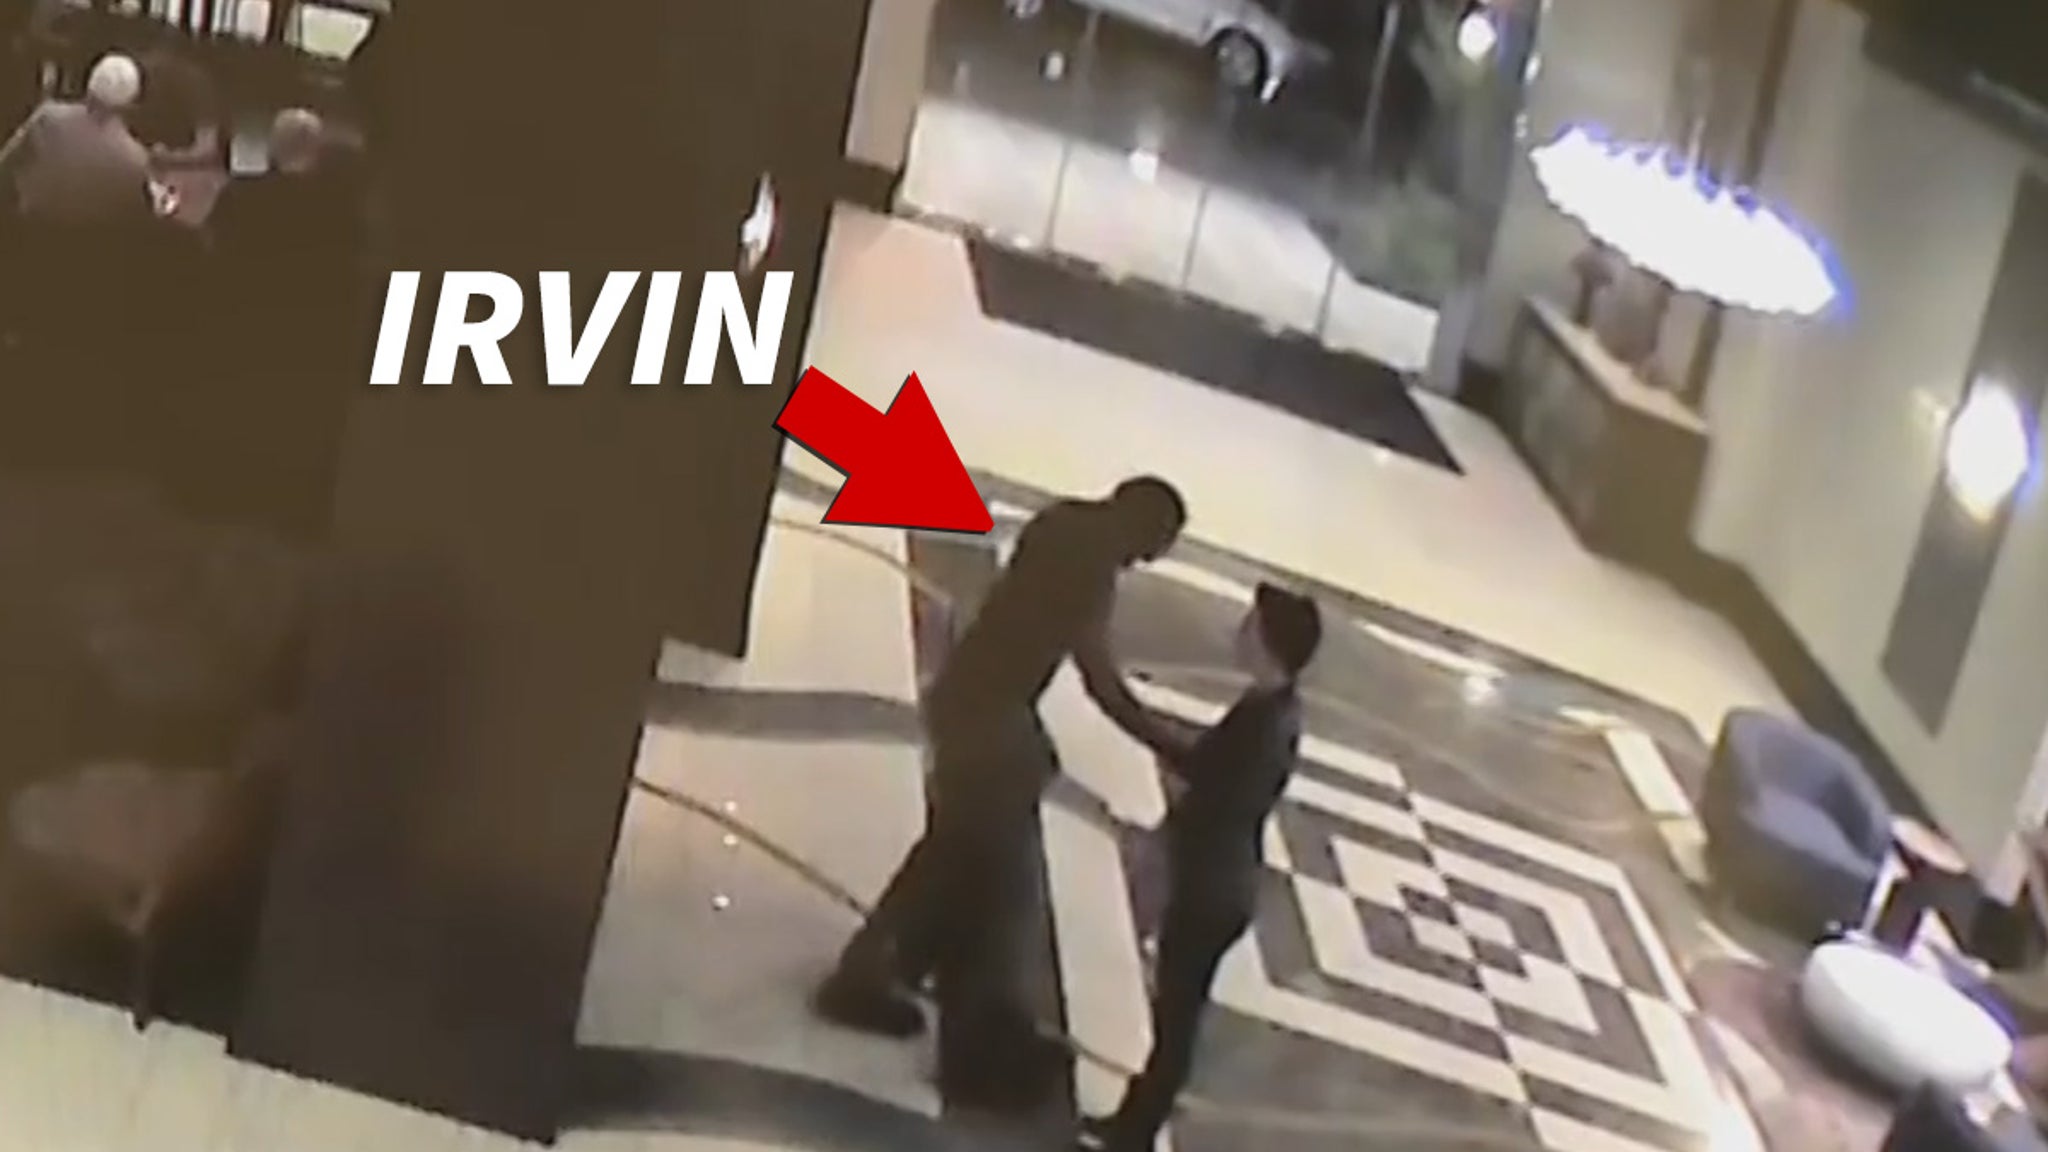 Michael Irvin Marriott Video Shows Ex-NFL Star Talking W/ Accuser, Touching Elbow thumbnail